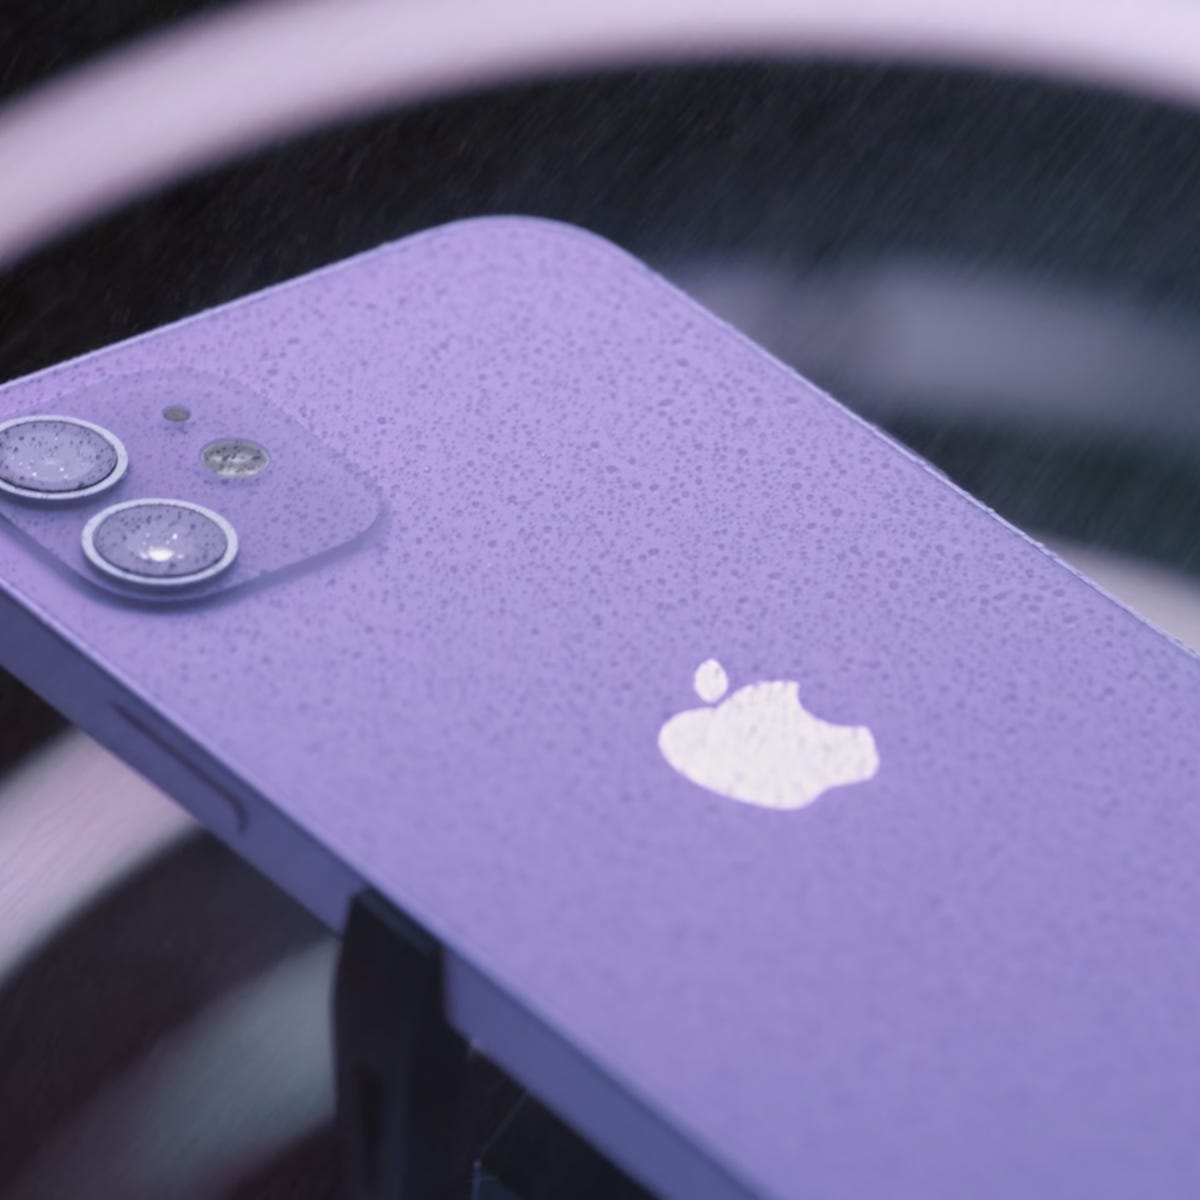 Surprise, a new iPhone 12 is coming this week, and it's purple - CNET